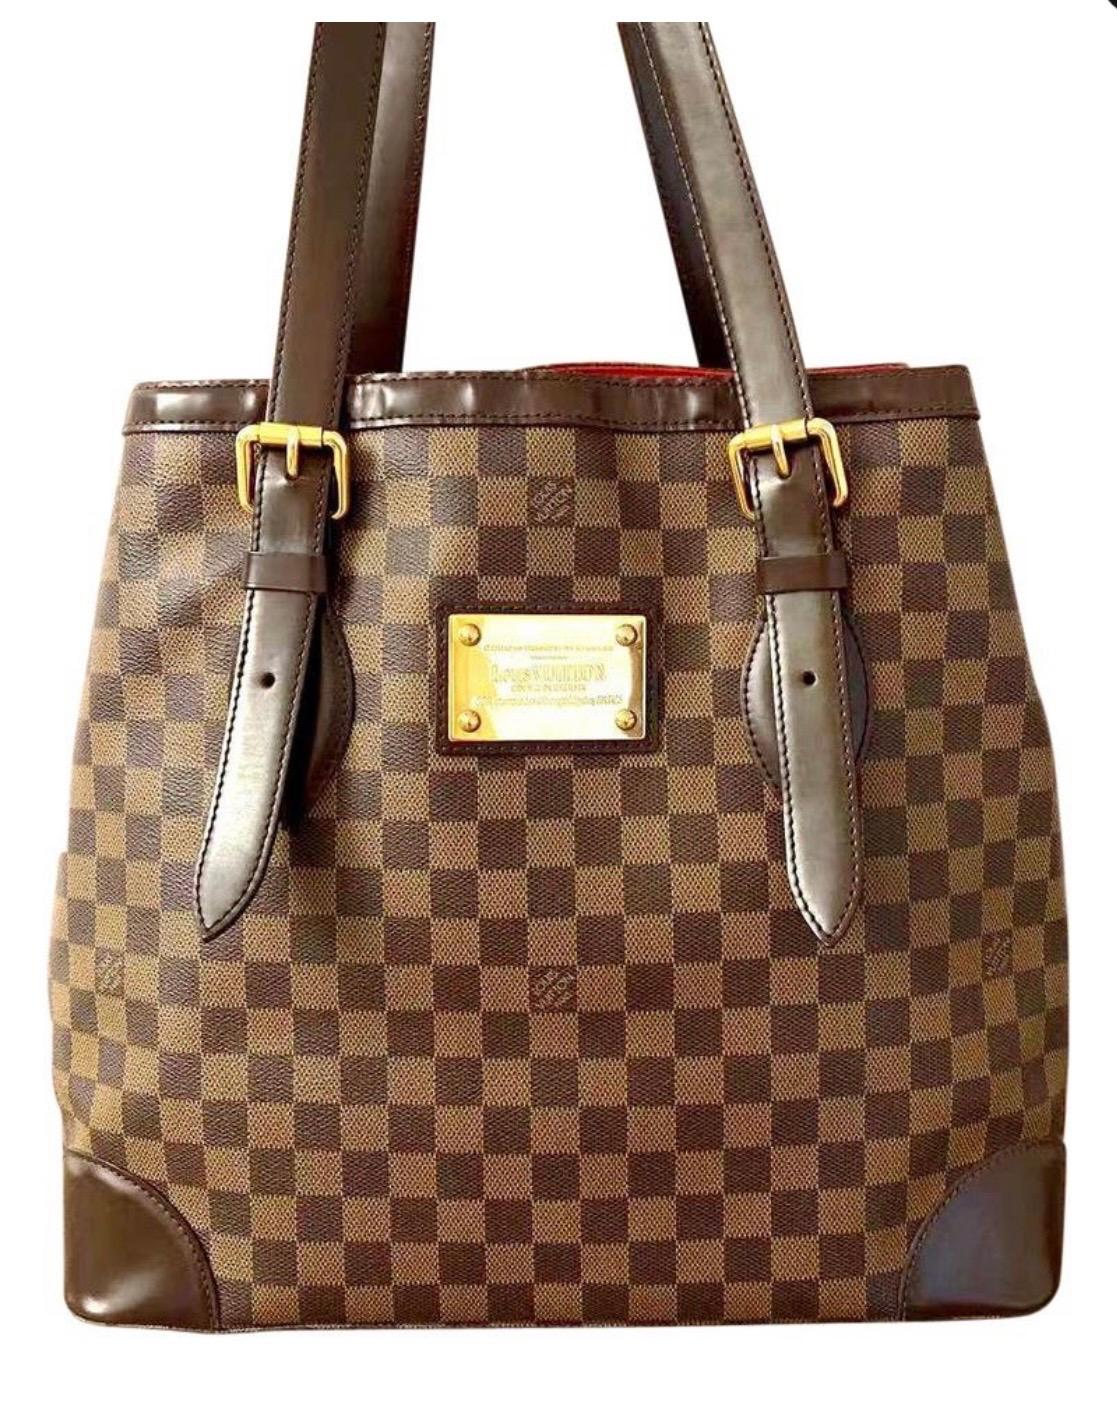 Structured Hampstead tote rendered in Louis Vuitton's signature Damier Ebene checked coated canvas, trimmed with tonal leather and accented with gold-tone brass hardware.

About LV Damier: The Damier, which translates to 